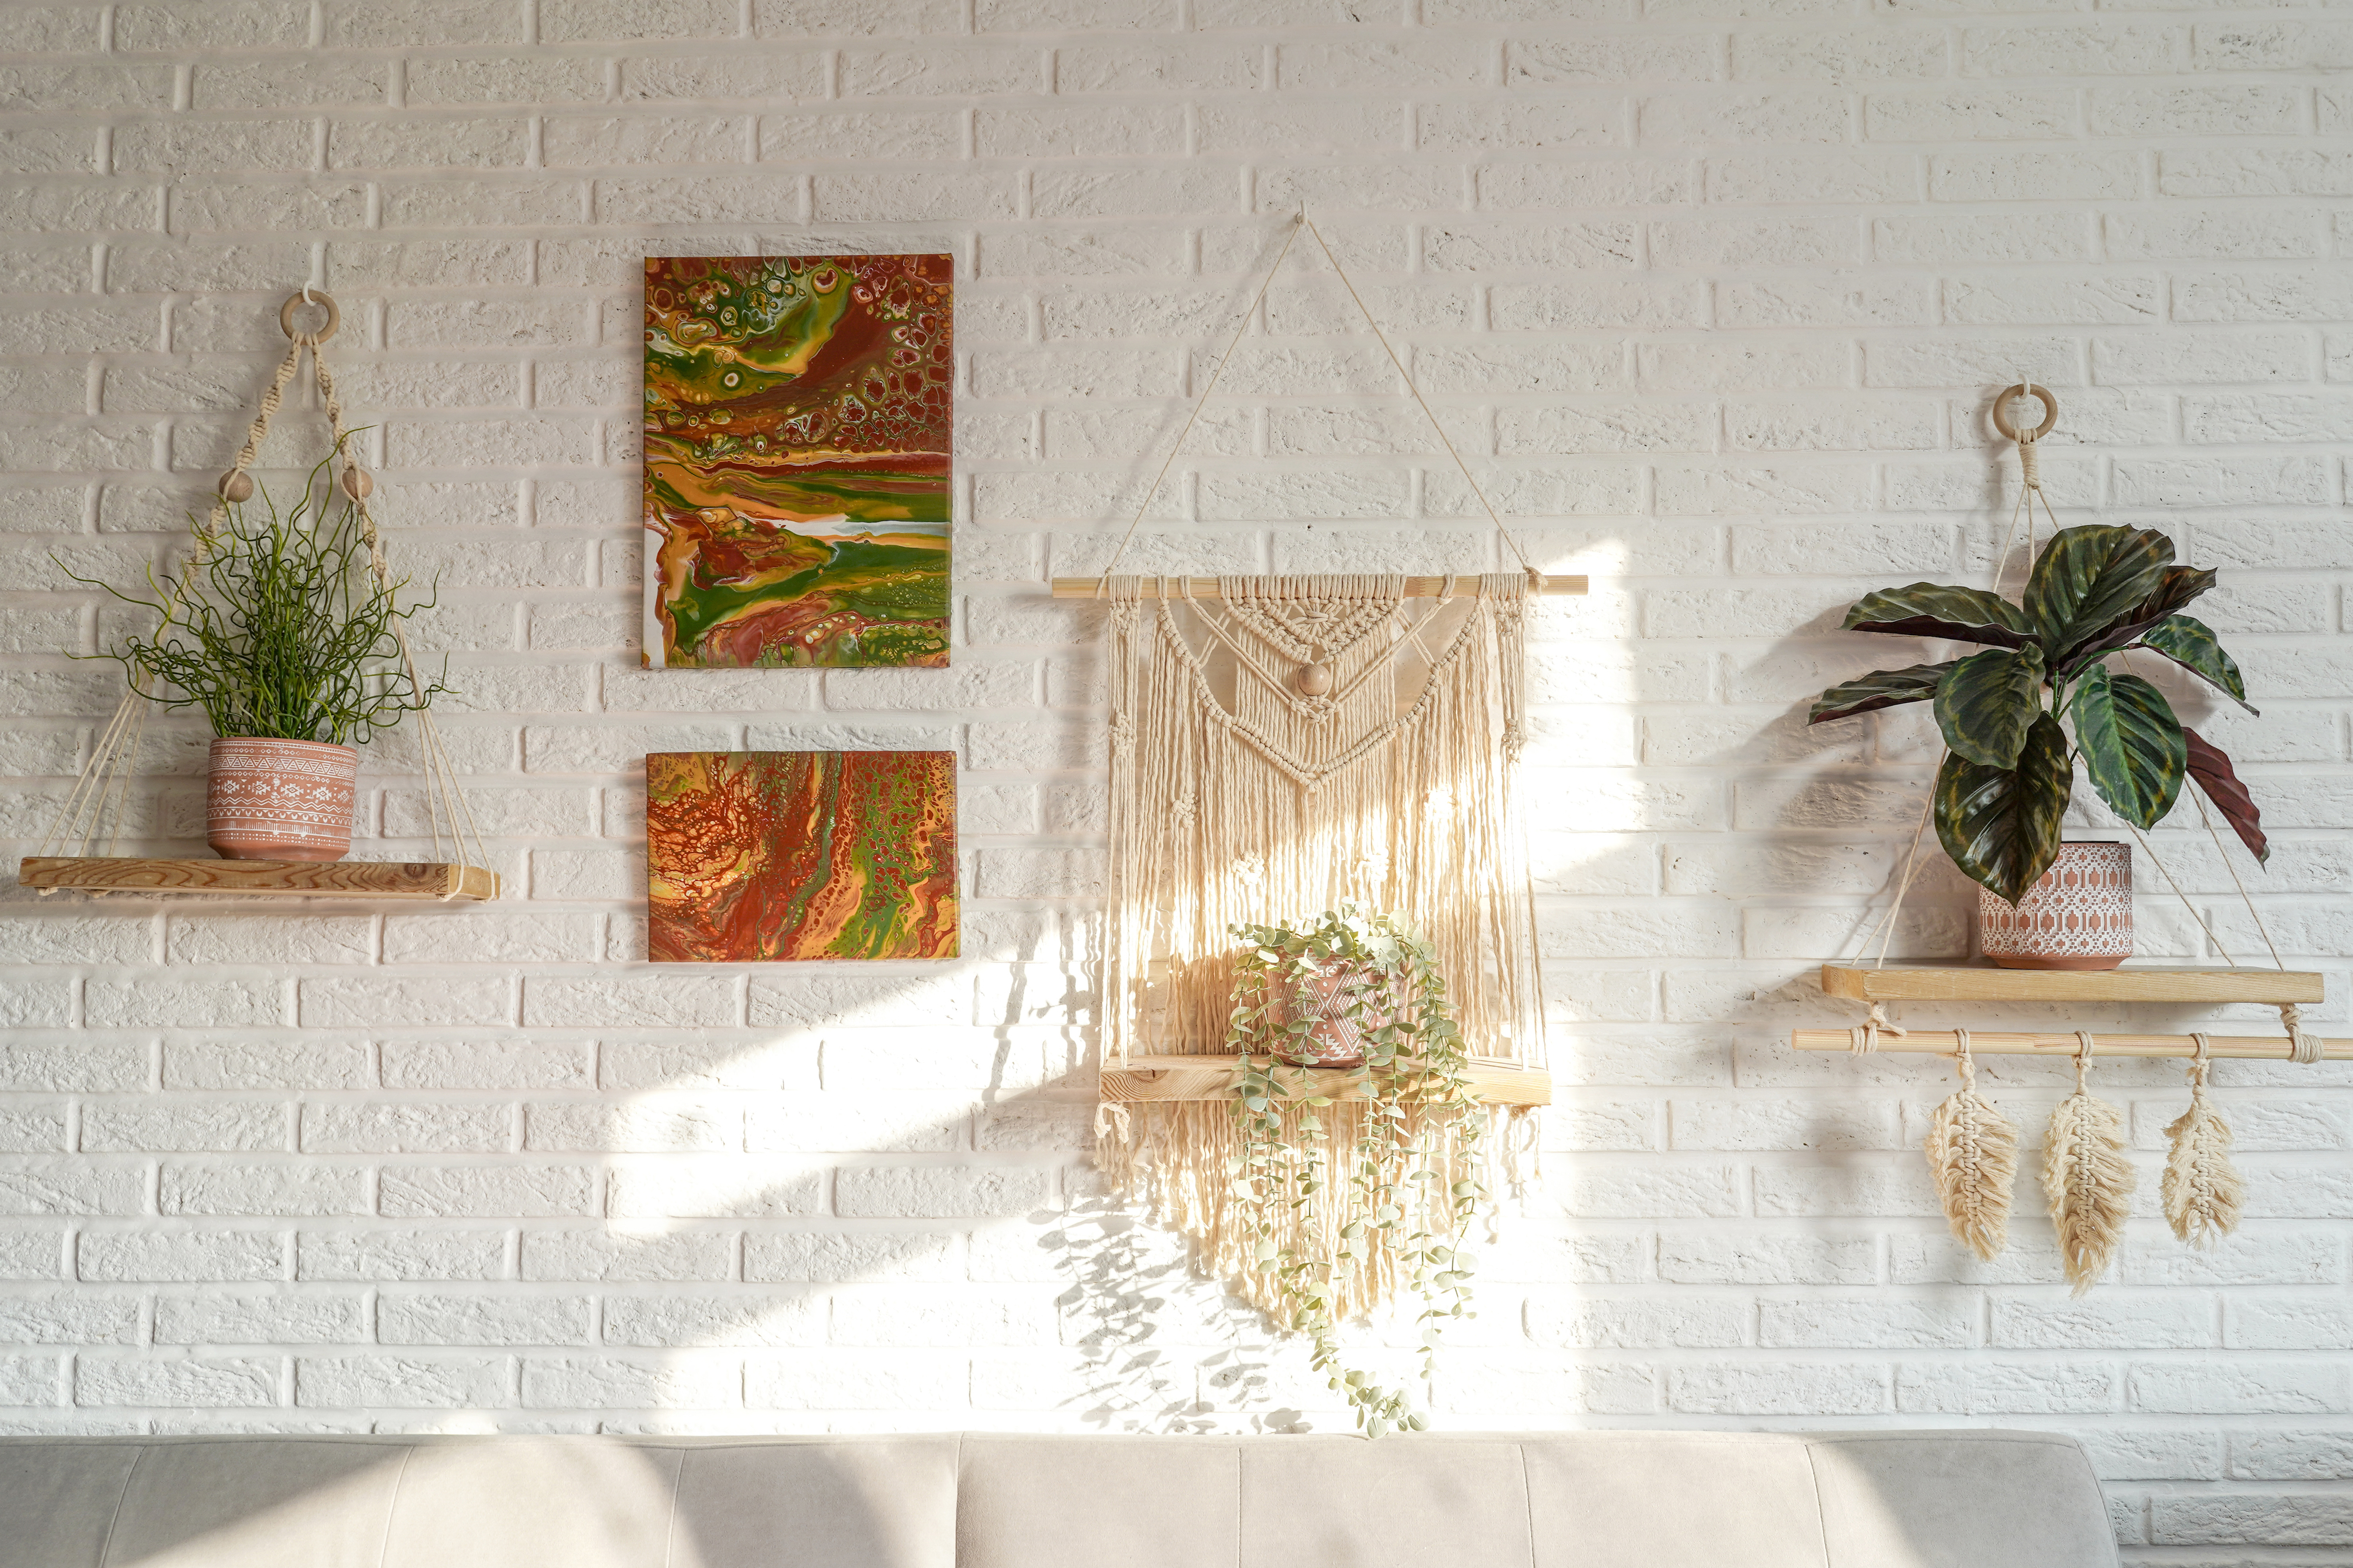 Wall with artistic decor and plants above a sofa, featuring a macramé wall hanging and two paintings